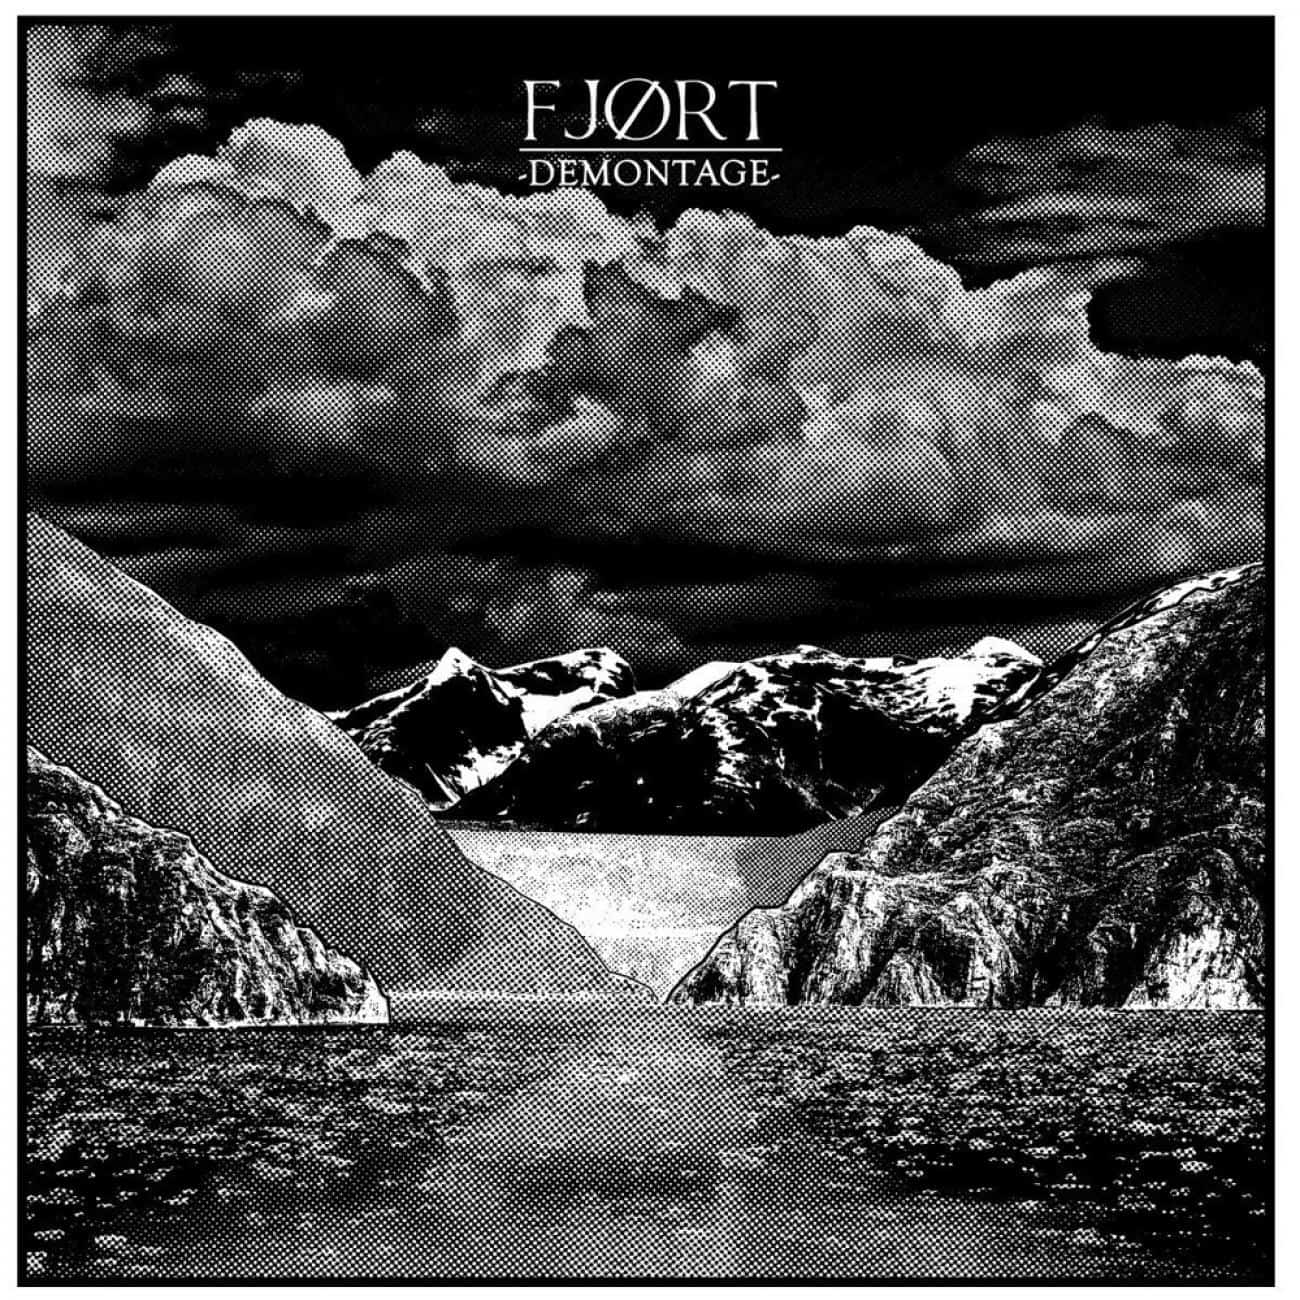 FJORT/FJØRT - Demontage 12" (Through Love) 7th Press - 650 copies in clear vinyl with a black screen print (Mountain/lake) - normal cover/inlay/dl code